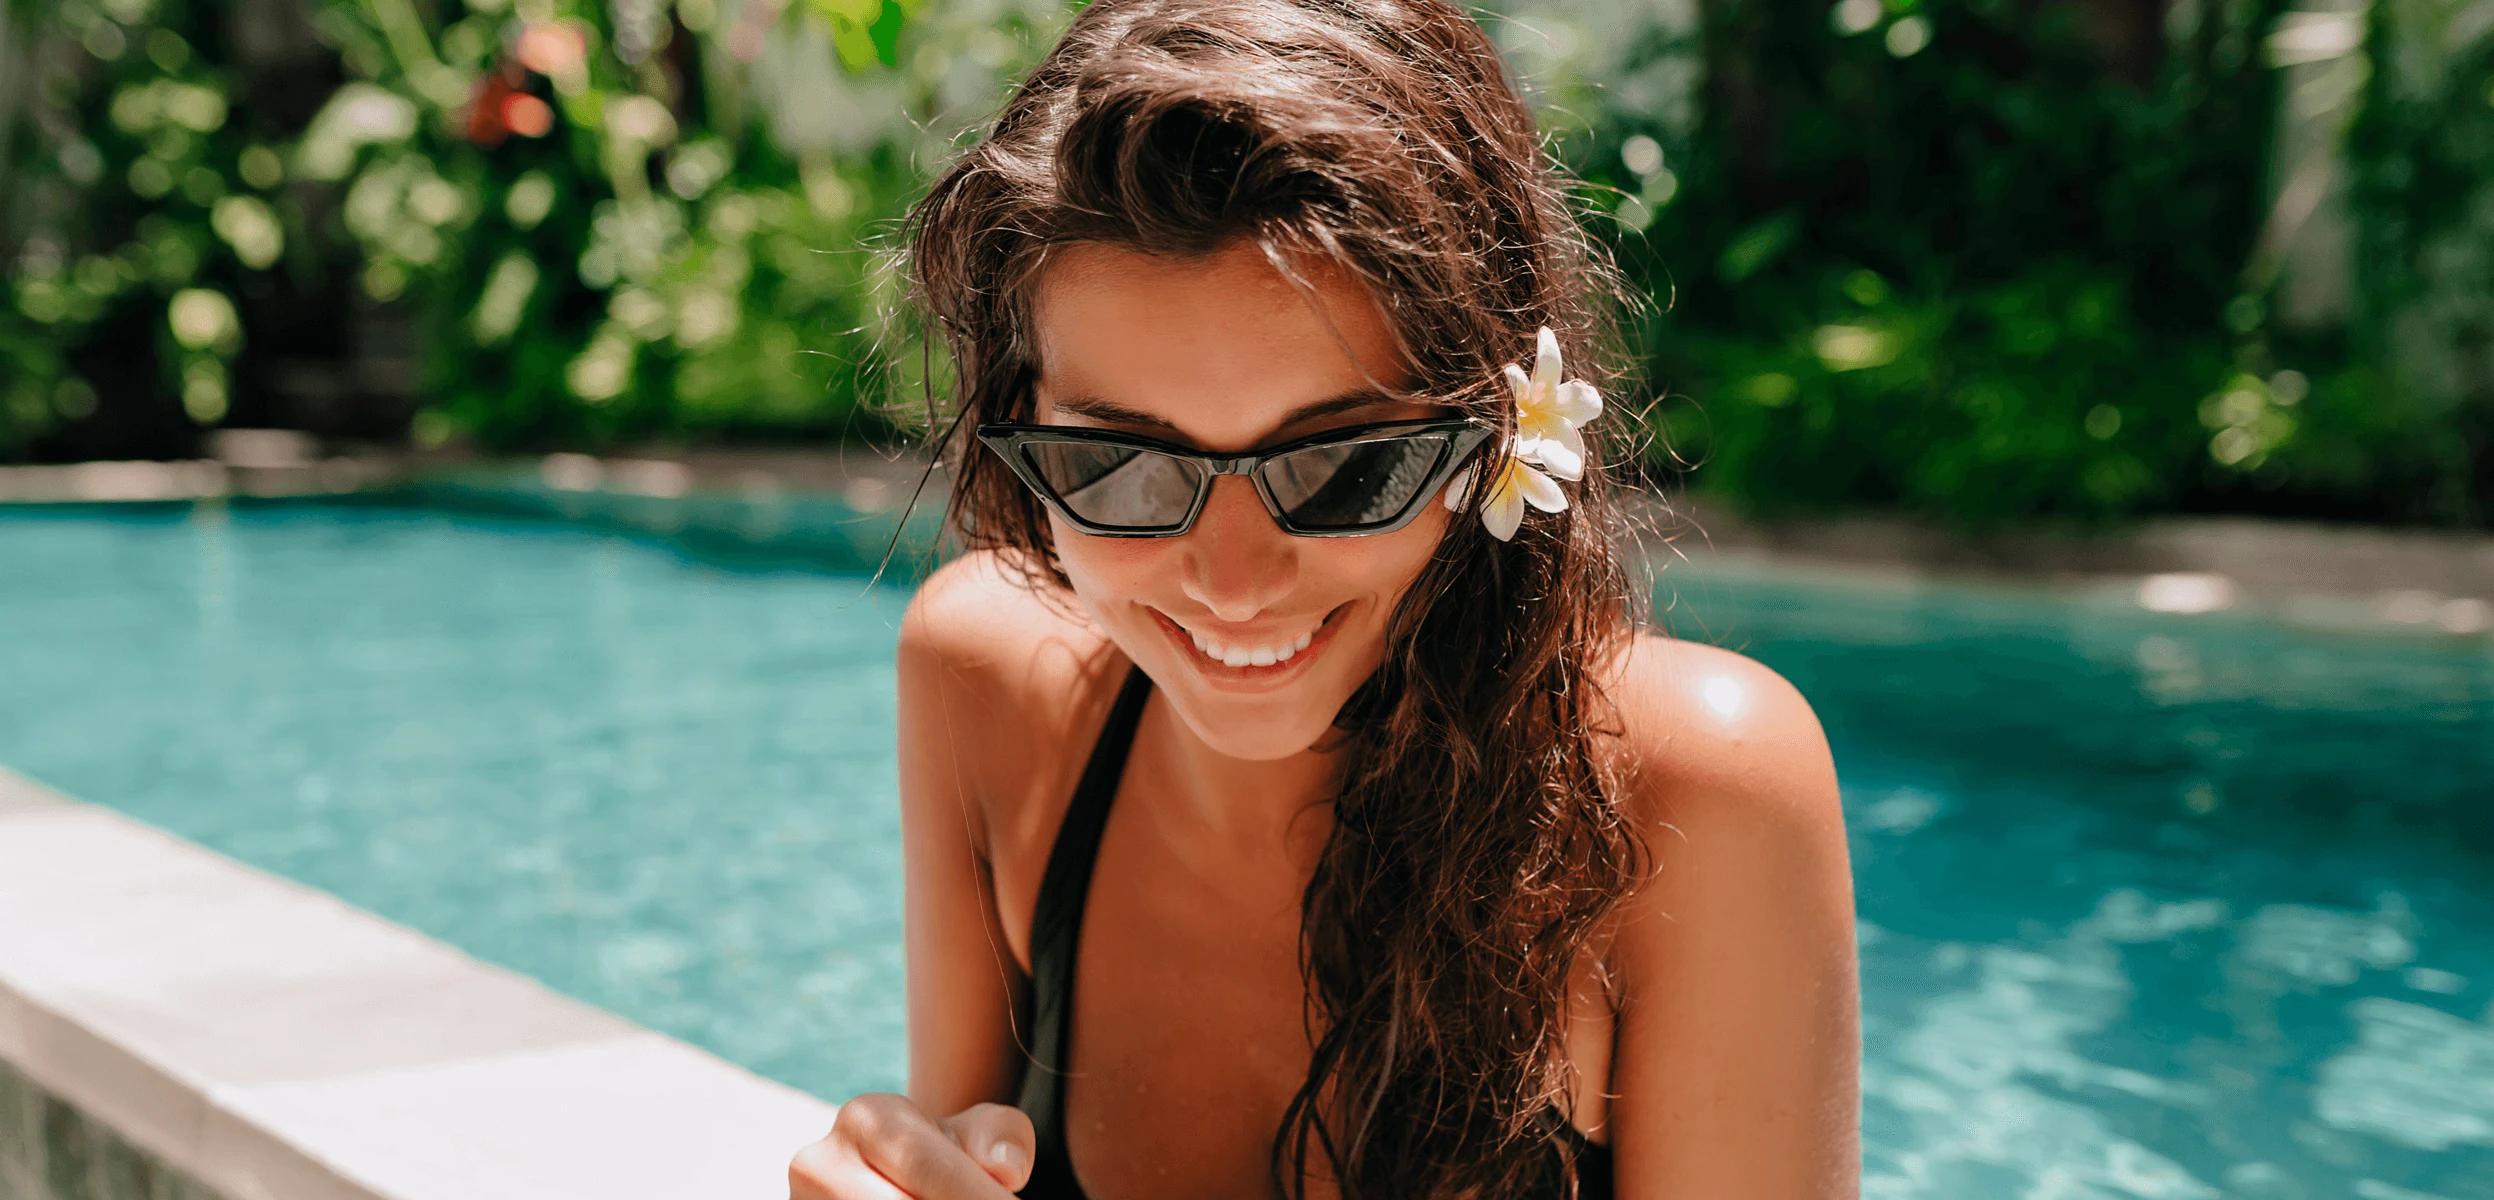 Smiling brunette woman with sunglasses and daisy in hair leaning on edge of pool